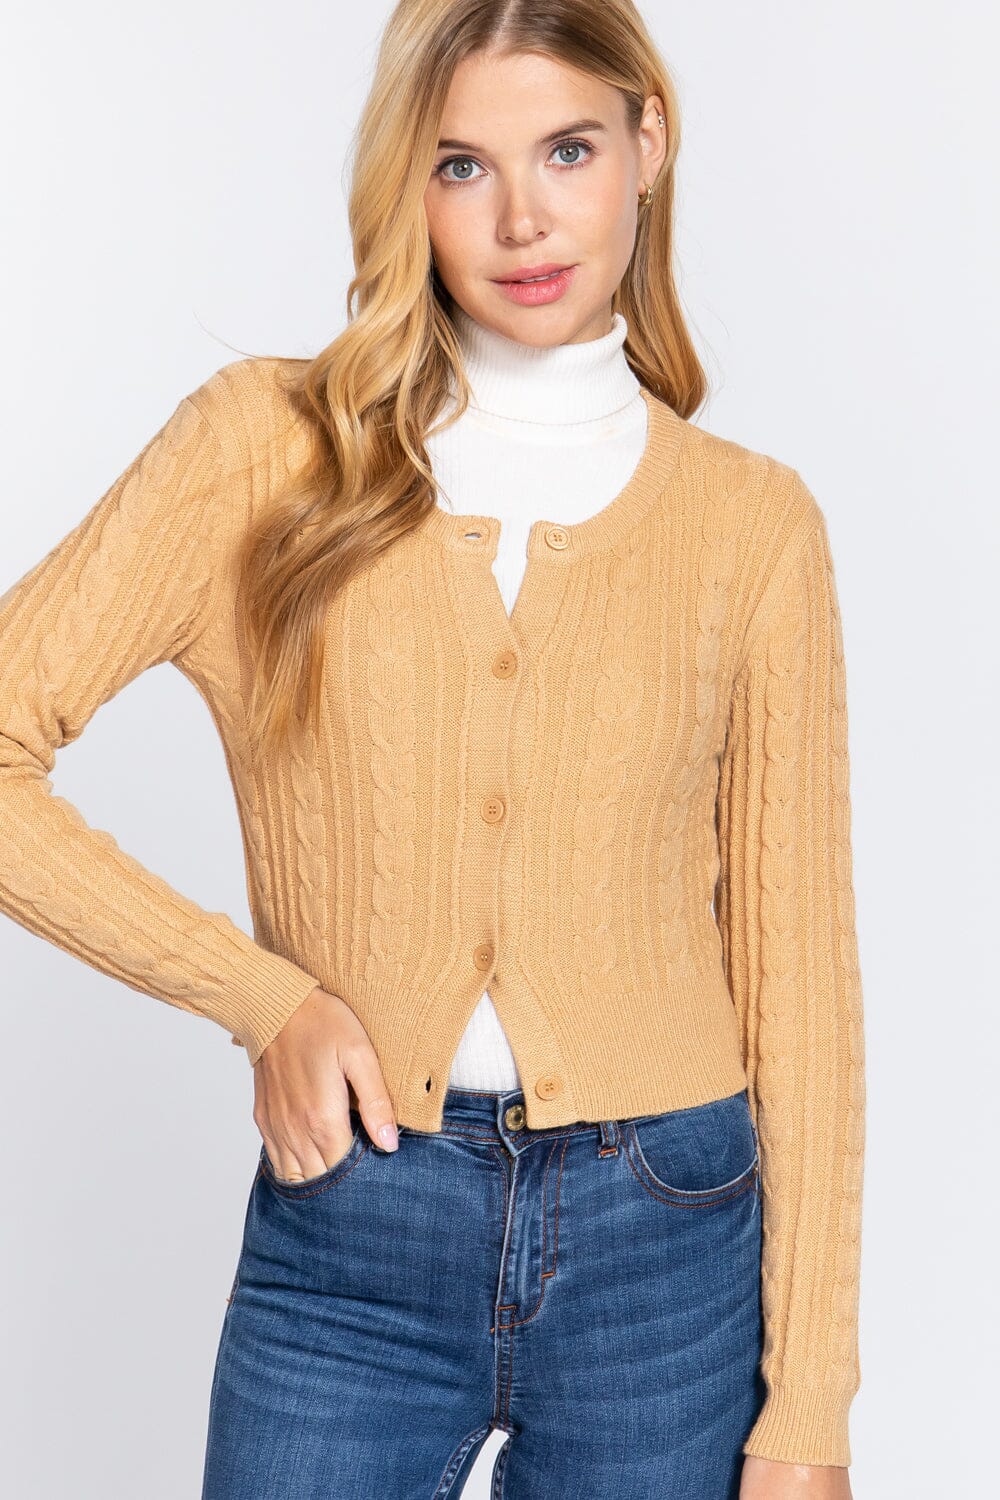 Butter Yellow Long Sleeve Cropped Cardigan Crew Neck Solid Button Down Knit Bolero Shrugs_ Coats & Jackets jehouze 